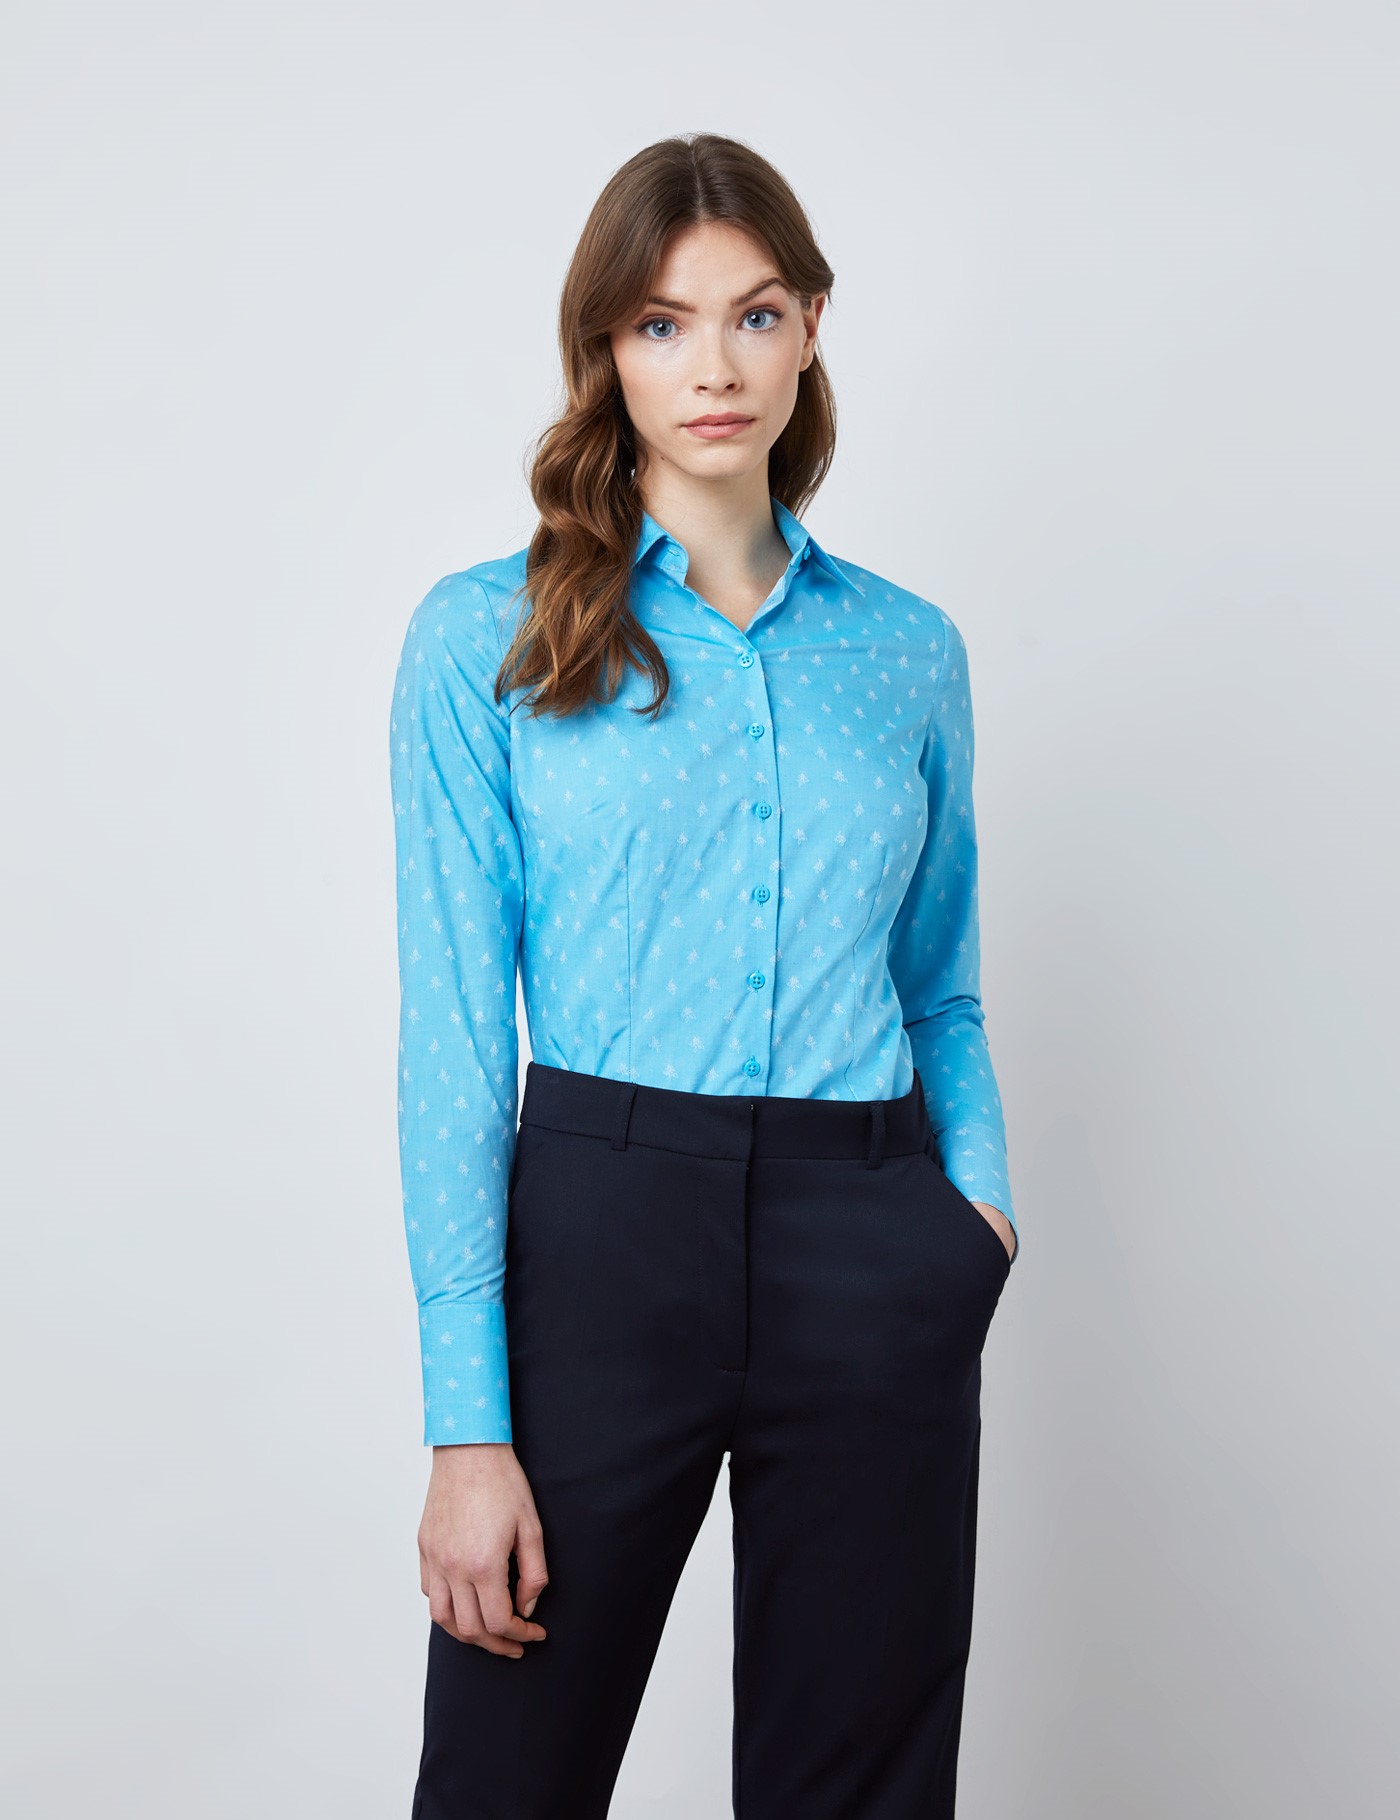 Cotton Dobby Women's Fitted Shirt with Floral Design in Light Blue ...